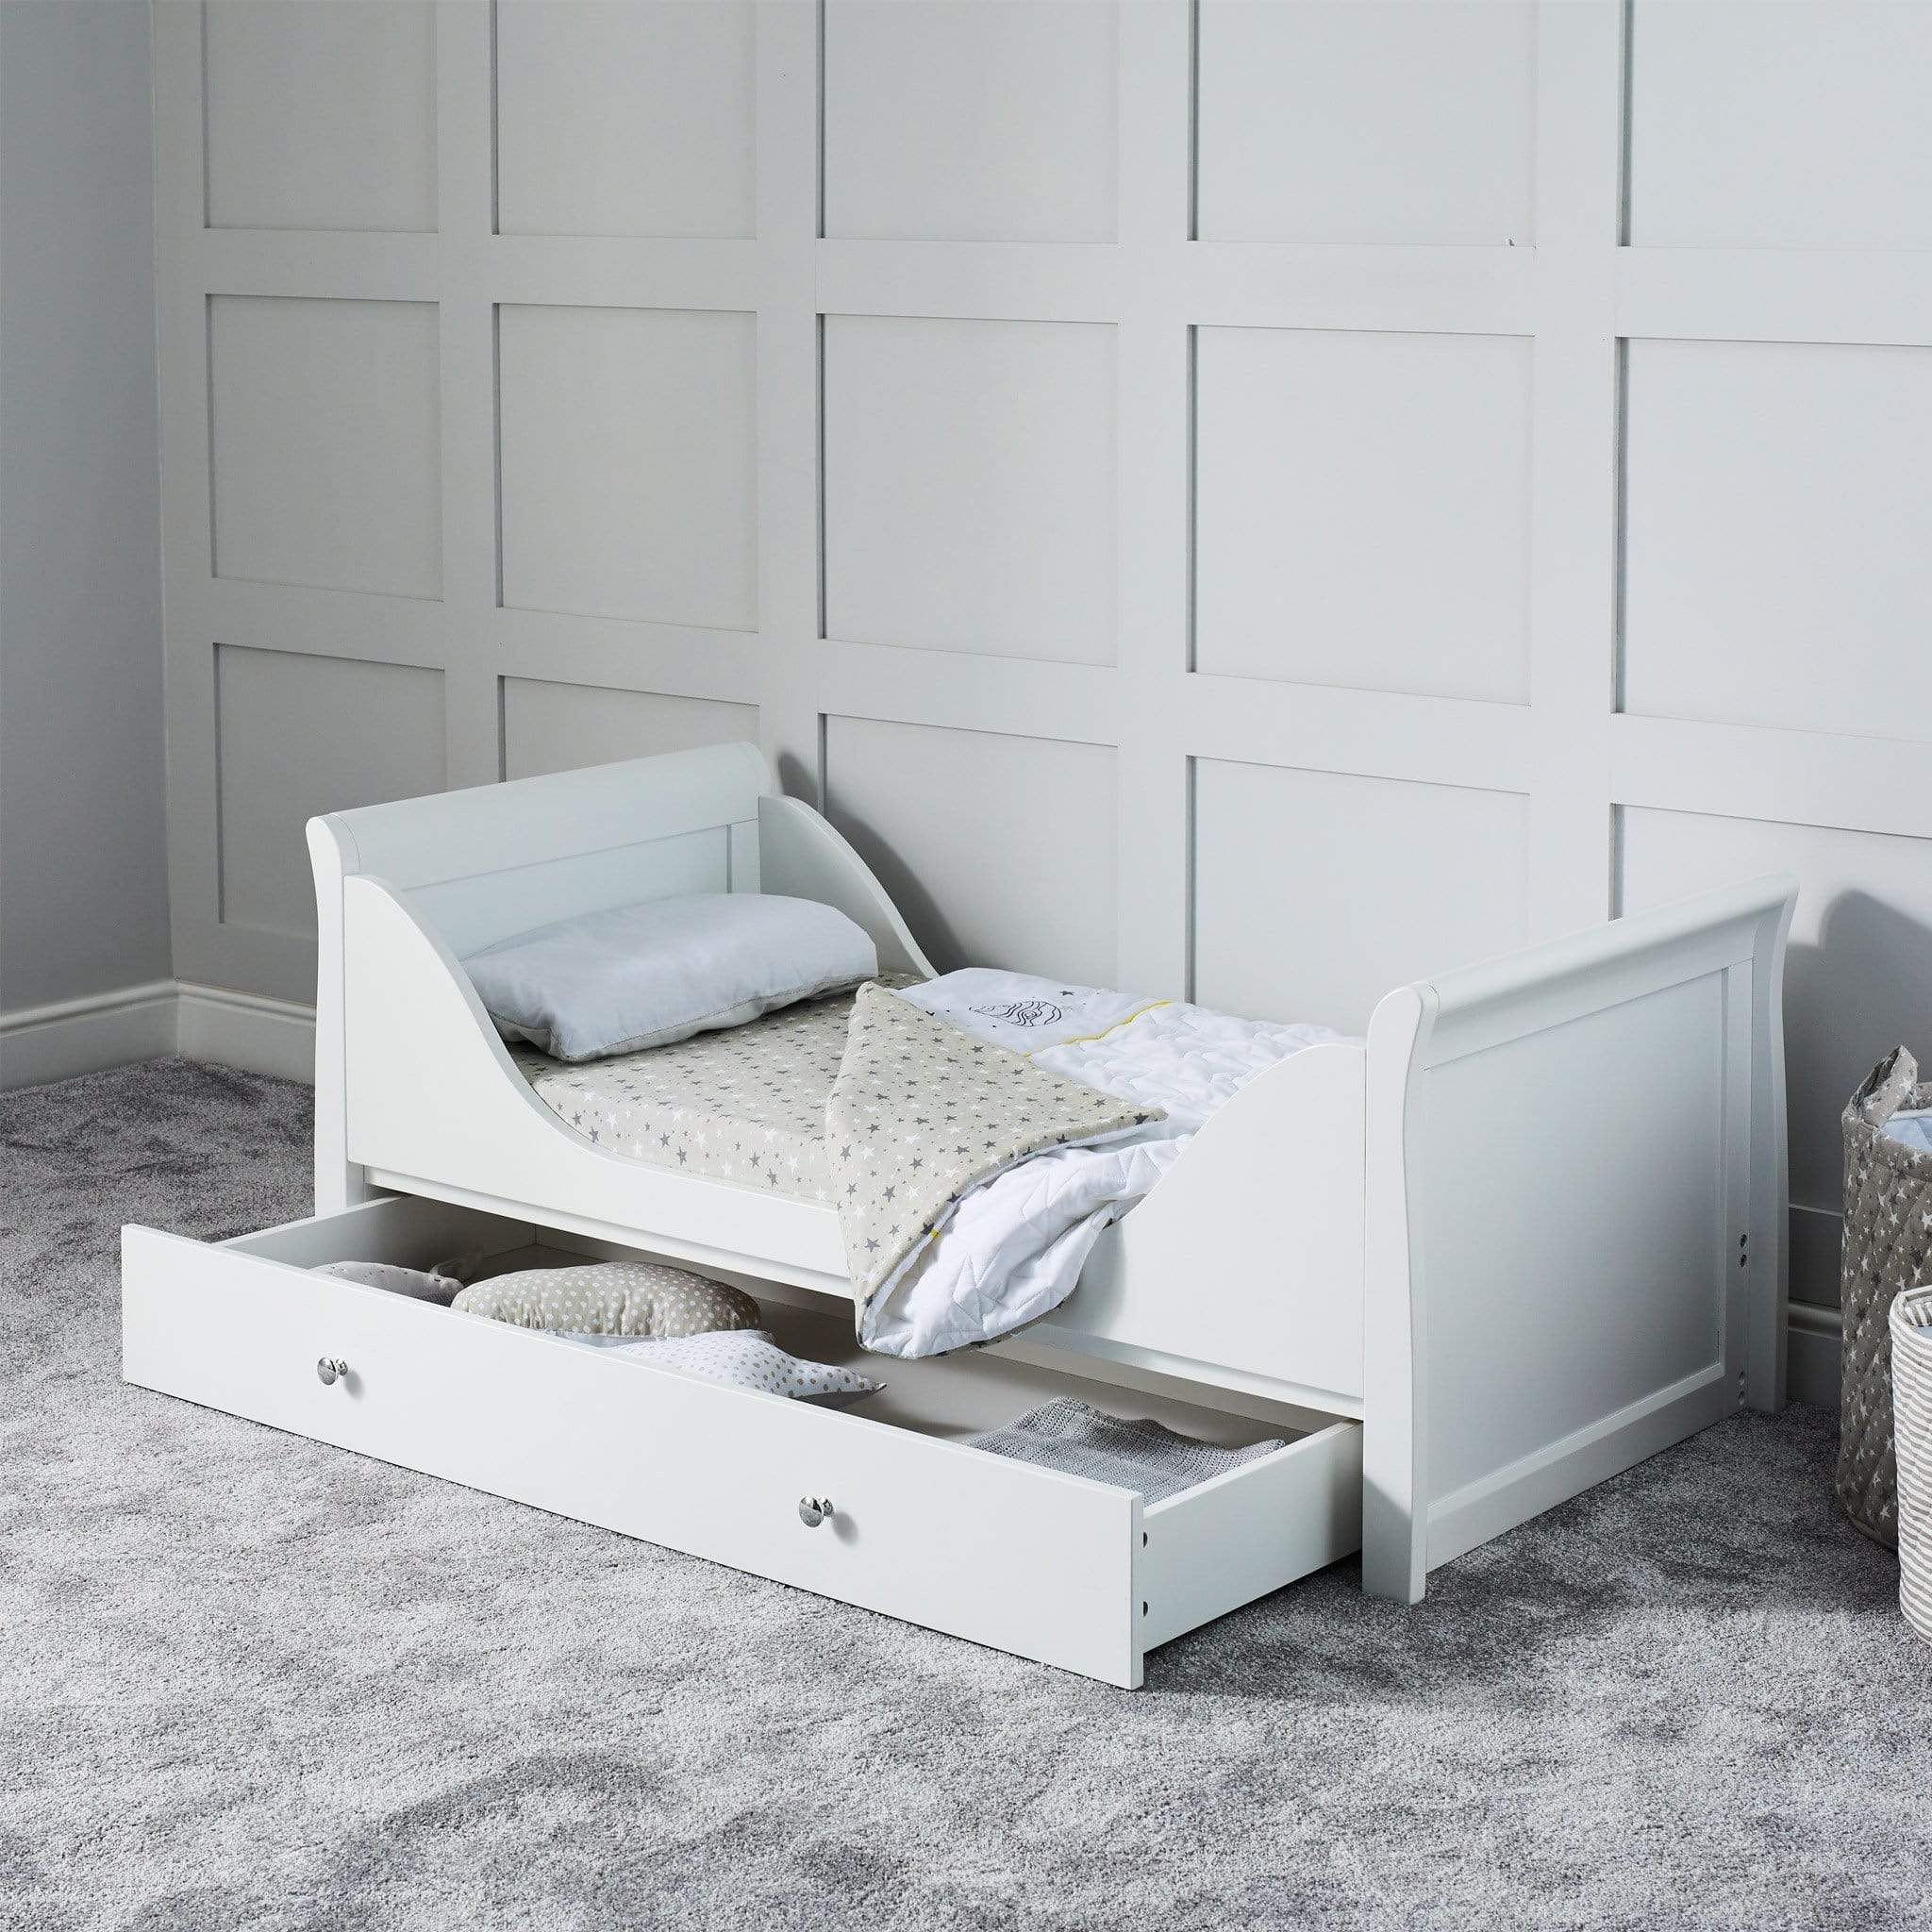 Ickle Bubba Snowdon Classic Cot Bed - White Cot Beds